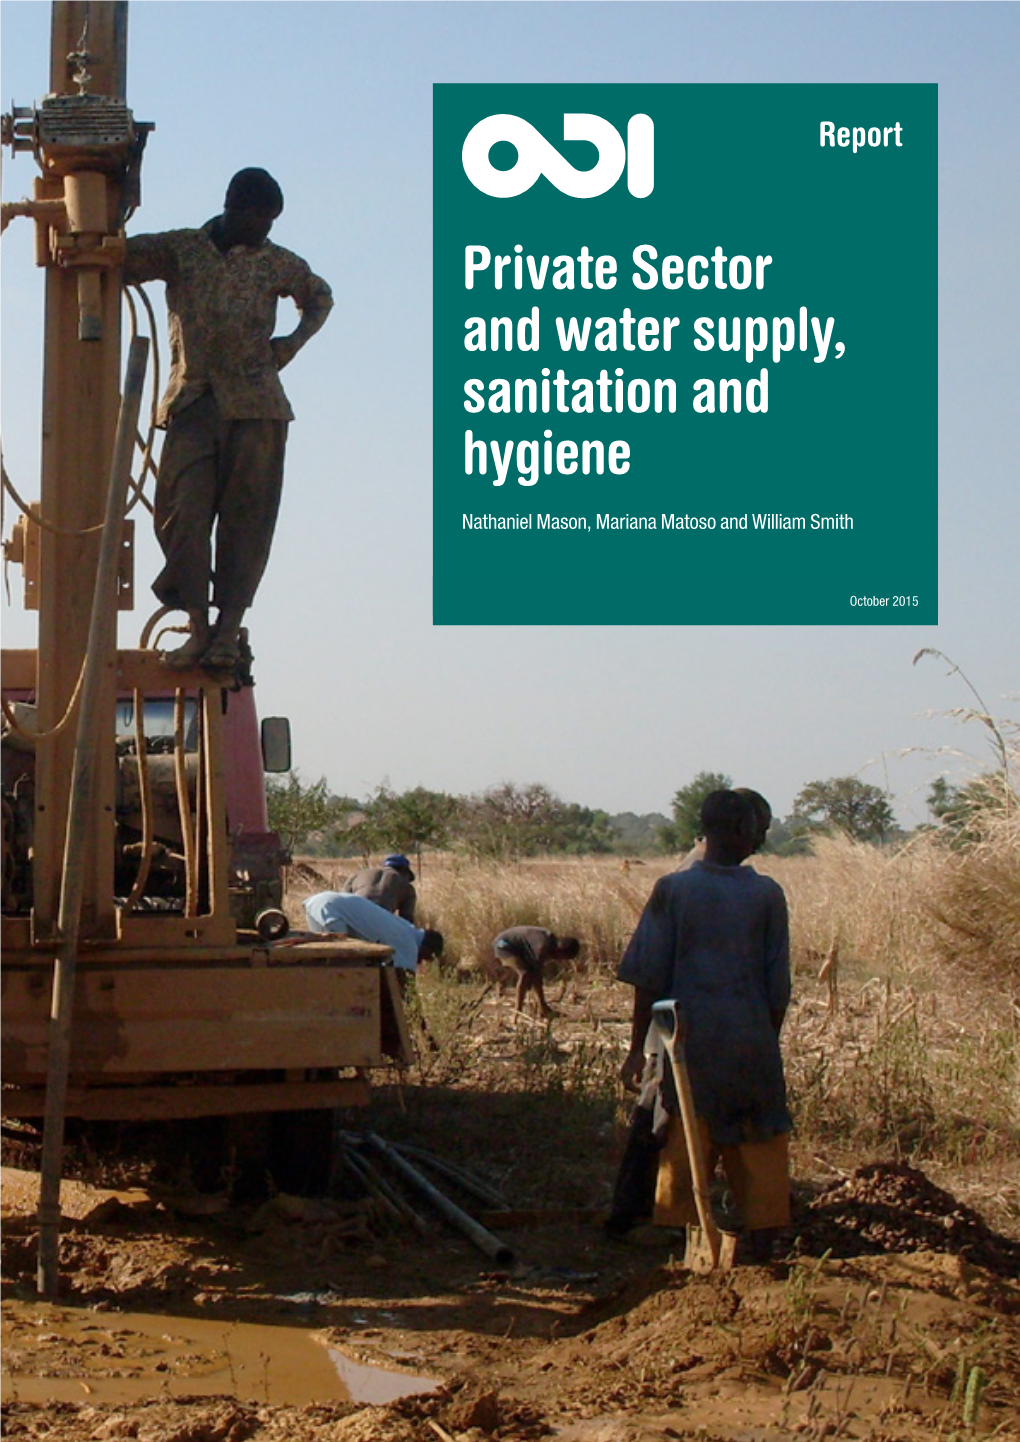 Private Sector and Water Supply, Sanitation and Hygiene